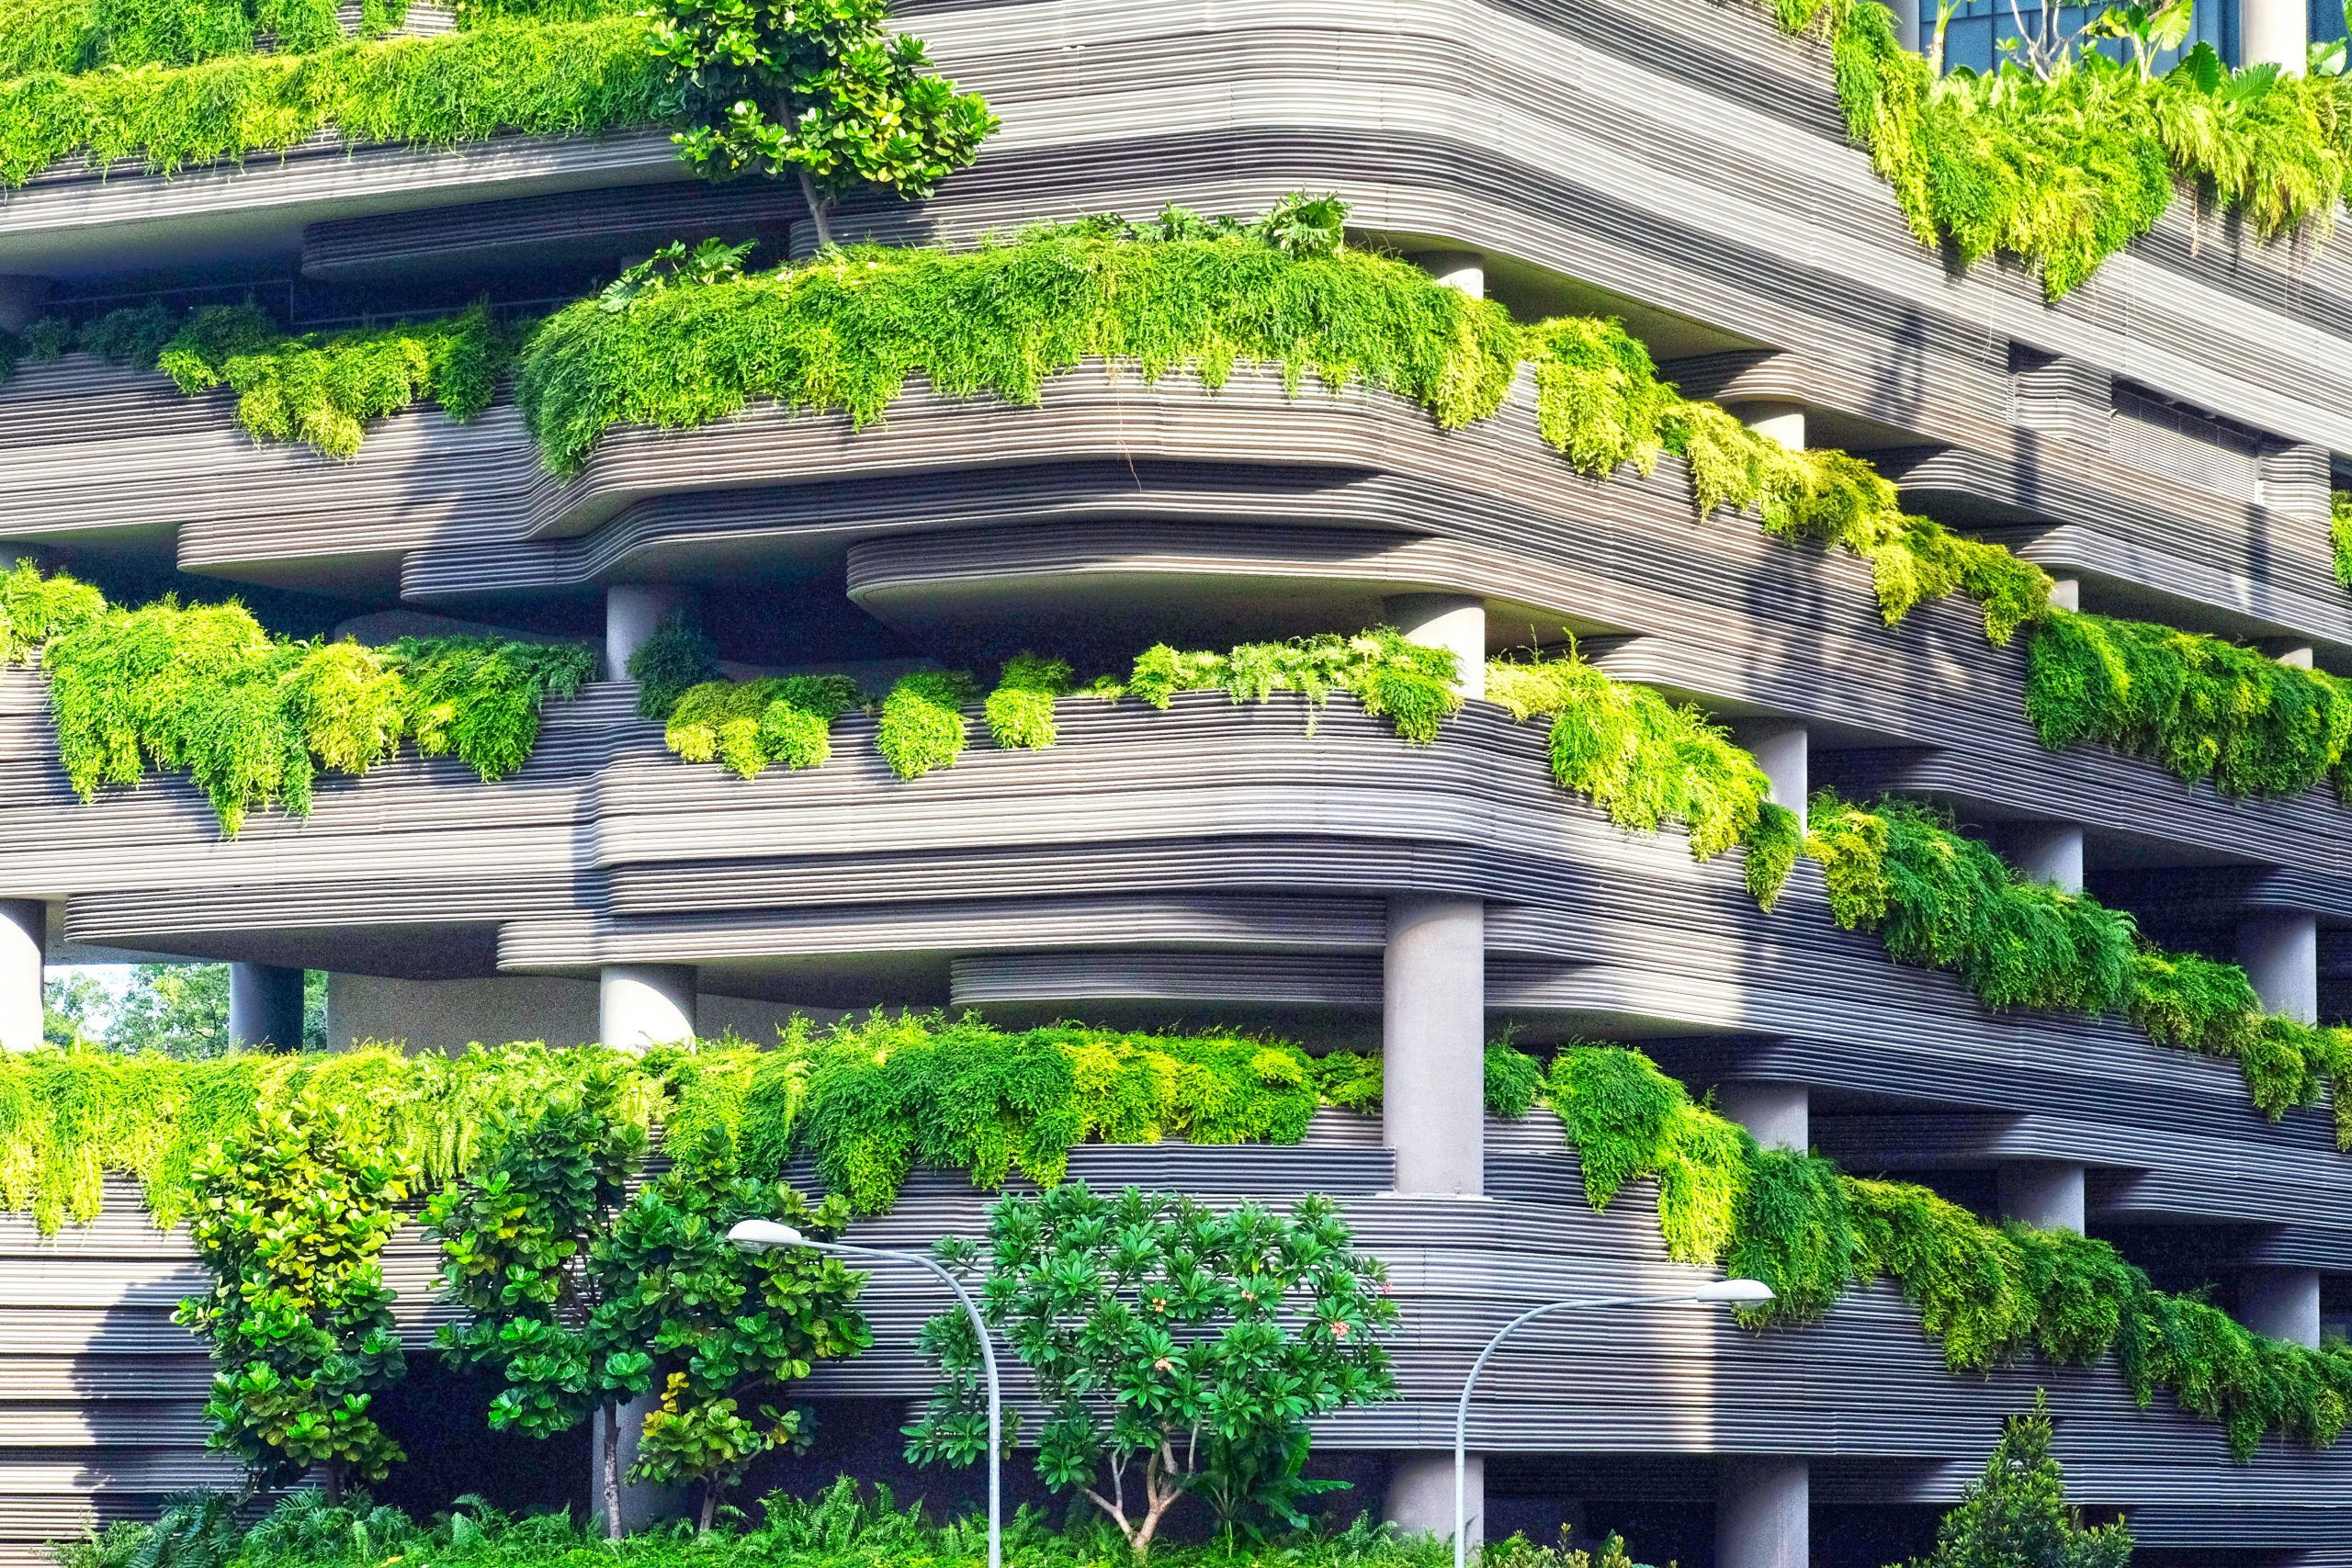 How Does Sustainable Architecture Address Climate Change?